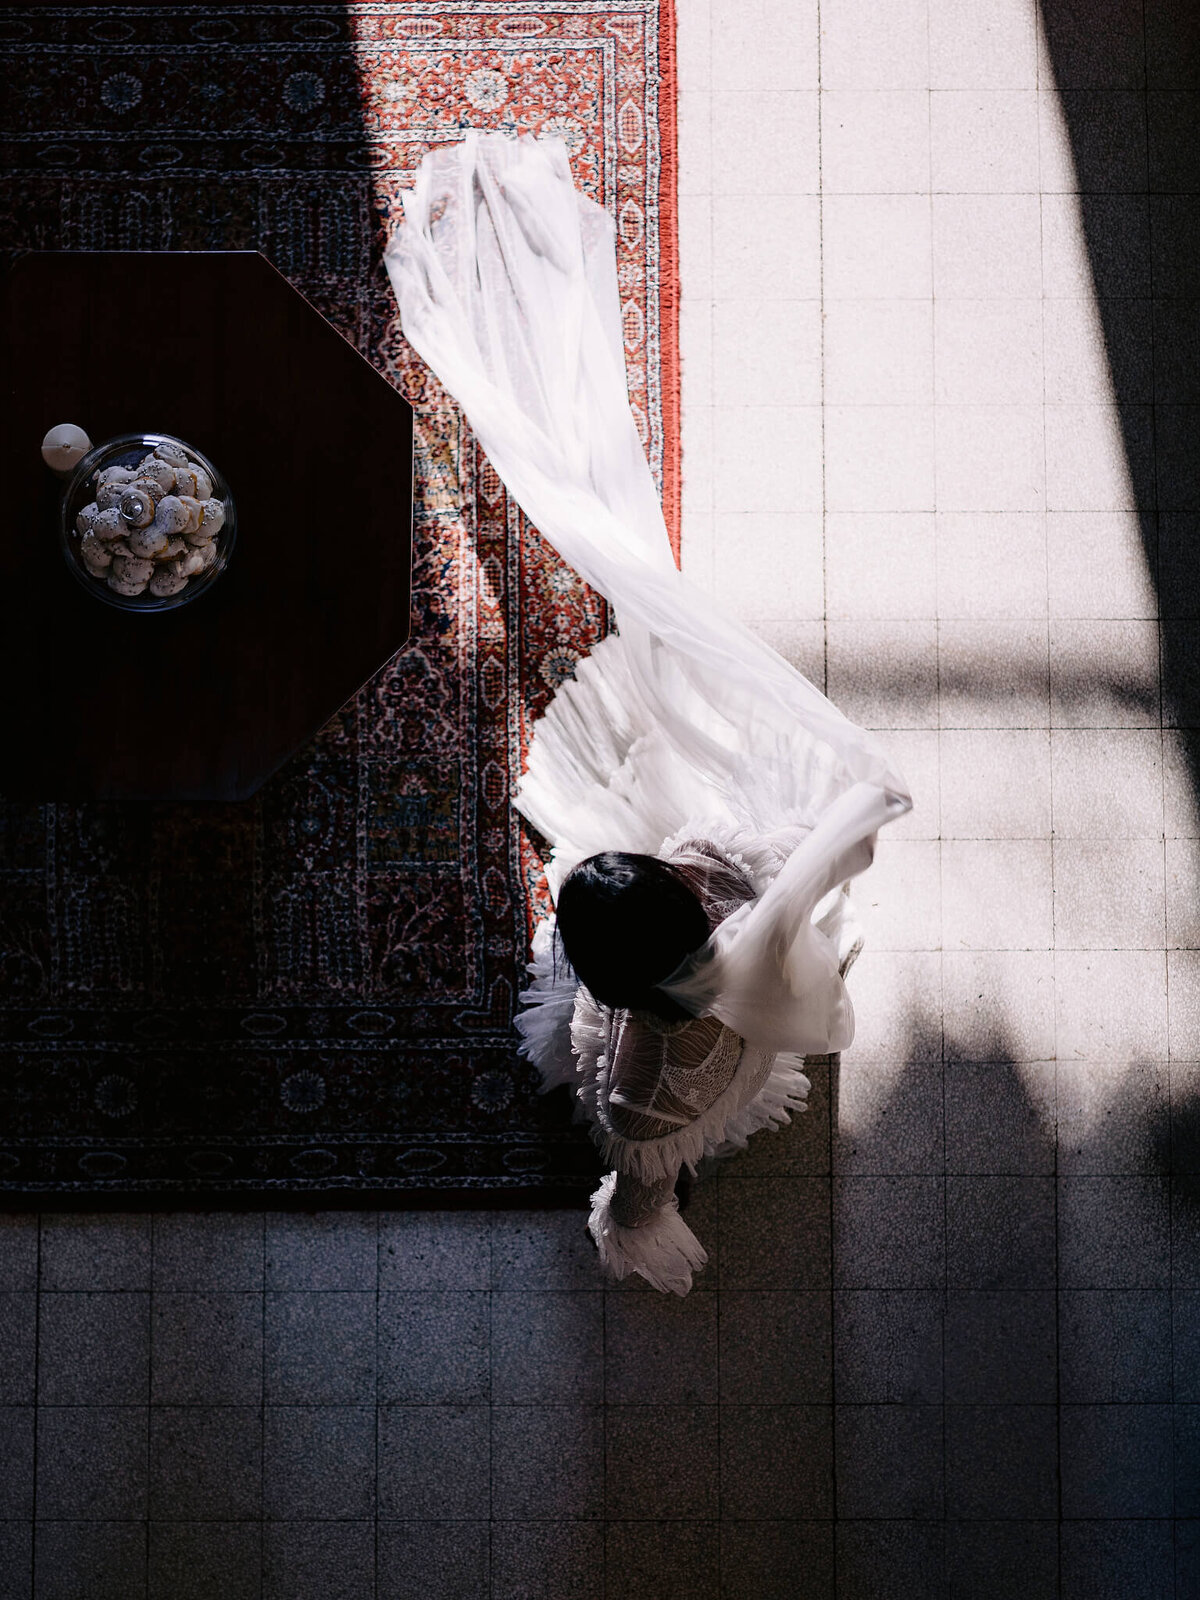 Top view of the bride standing on a red carpet; on the side is a small brown table with a plate of pastries in the middle